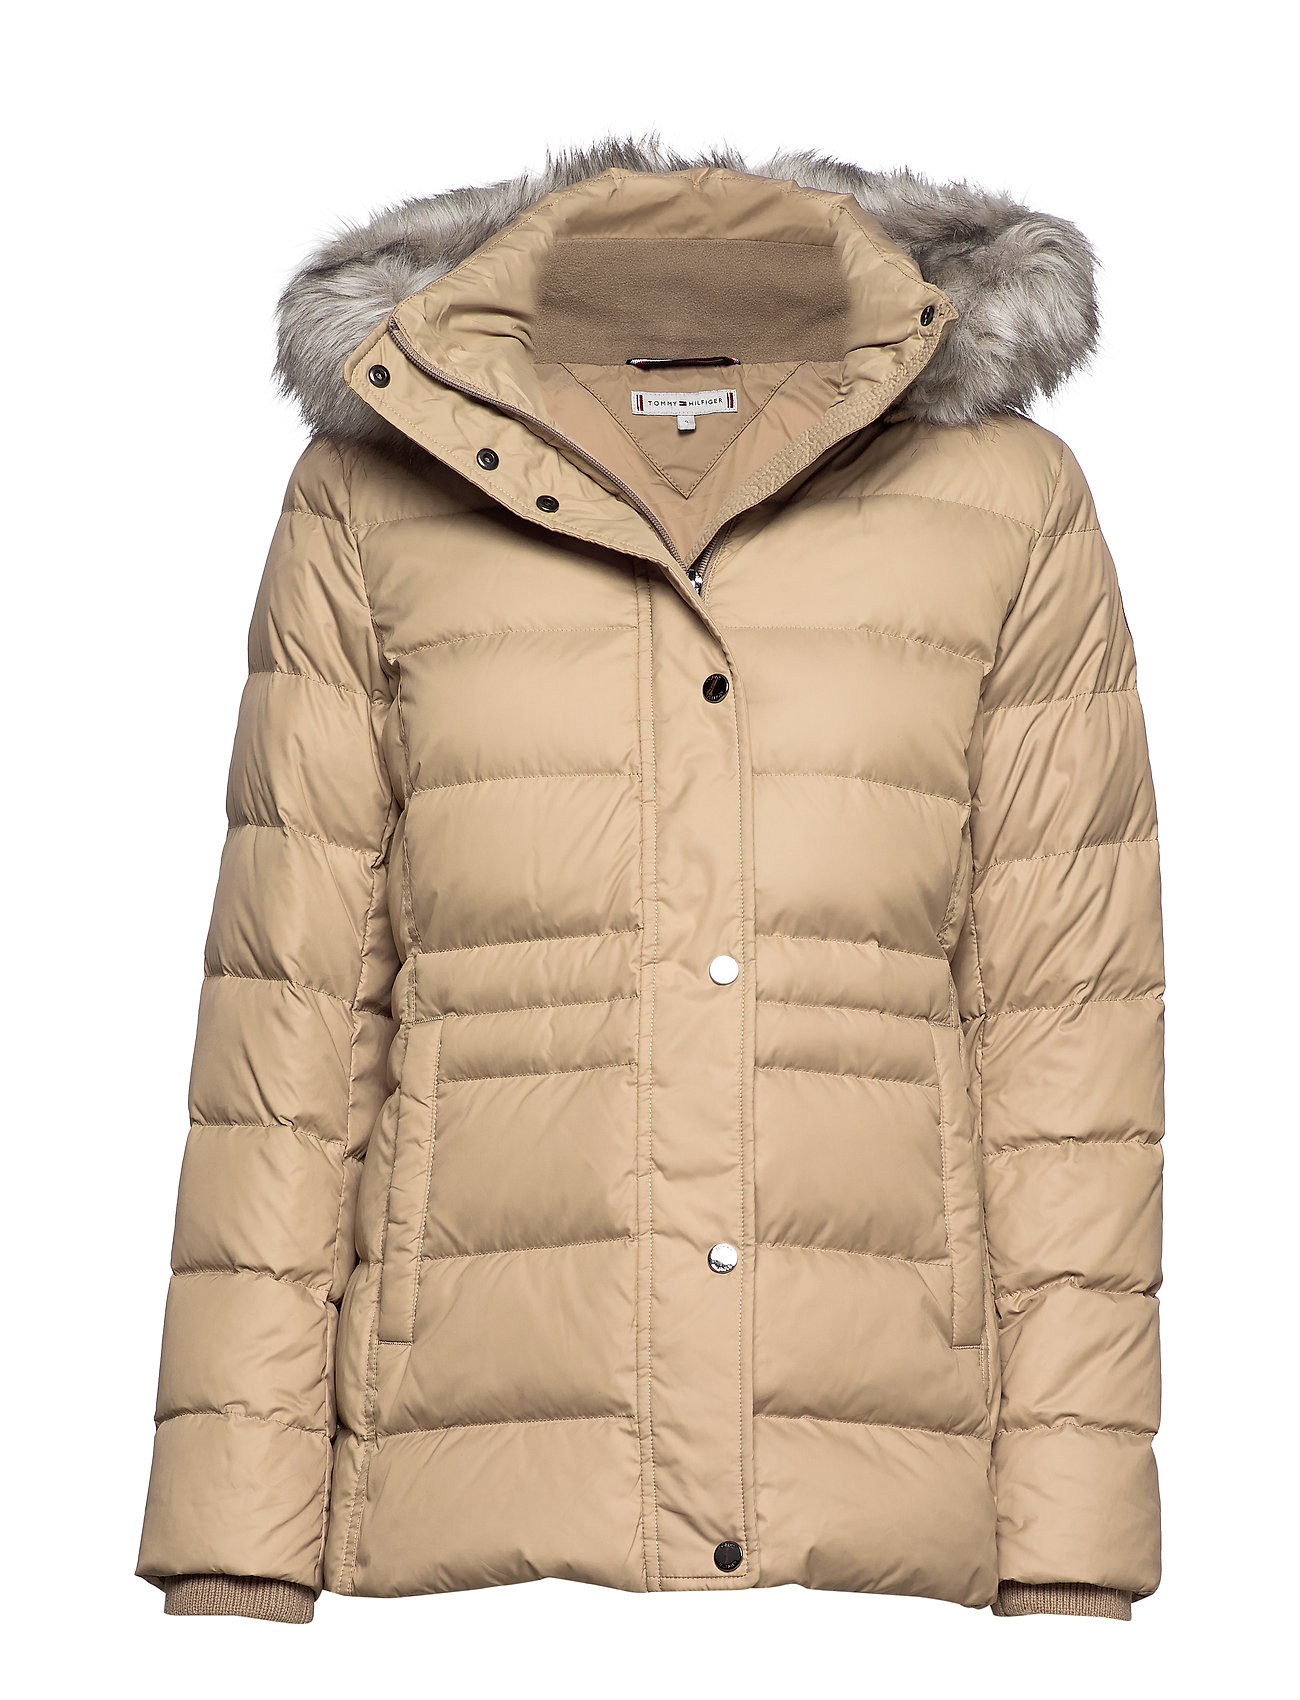 tommy hilfiger new tyra down coat